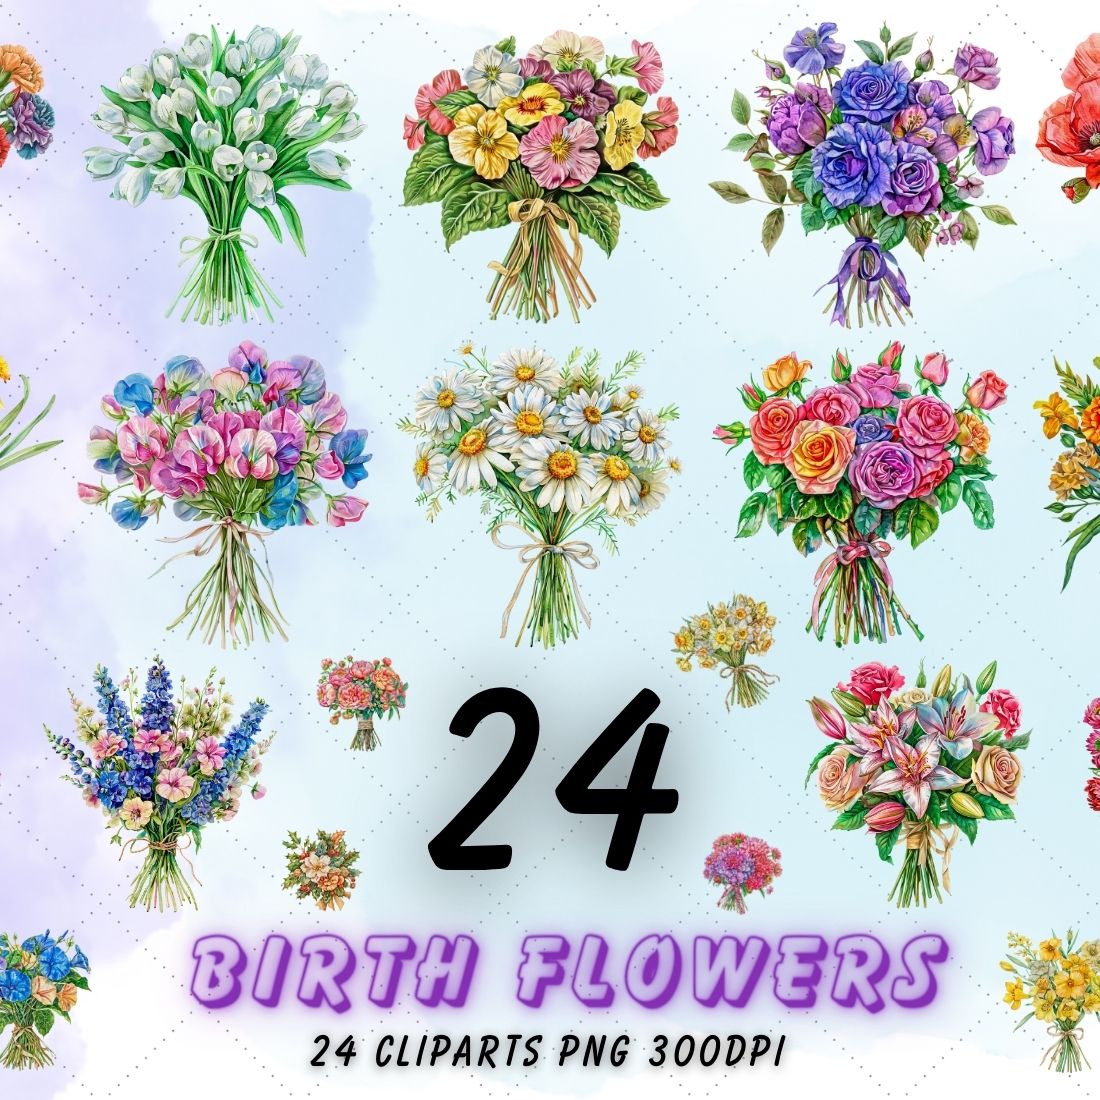 Birth Month Flower Clipart, Birth Flower PNG, Antique Floral PNG, Personalized Flower Bouquet Graphic, Birthday Flower, Floral Botanical PNG cover image.